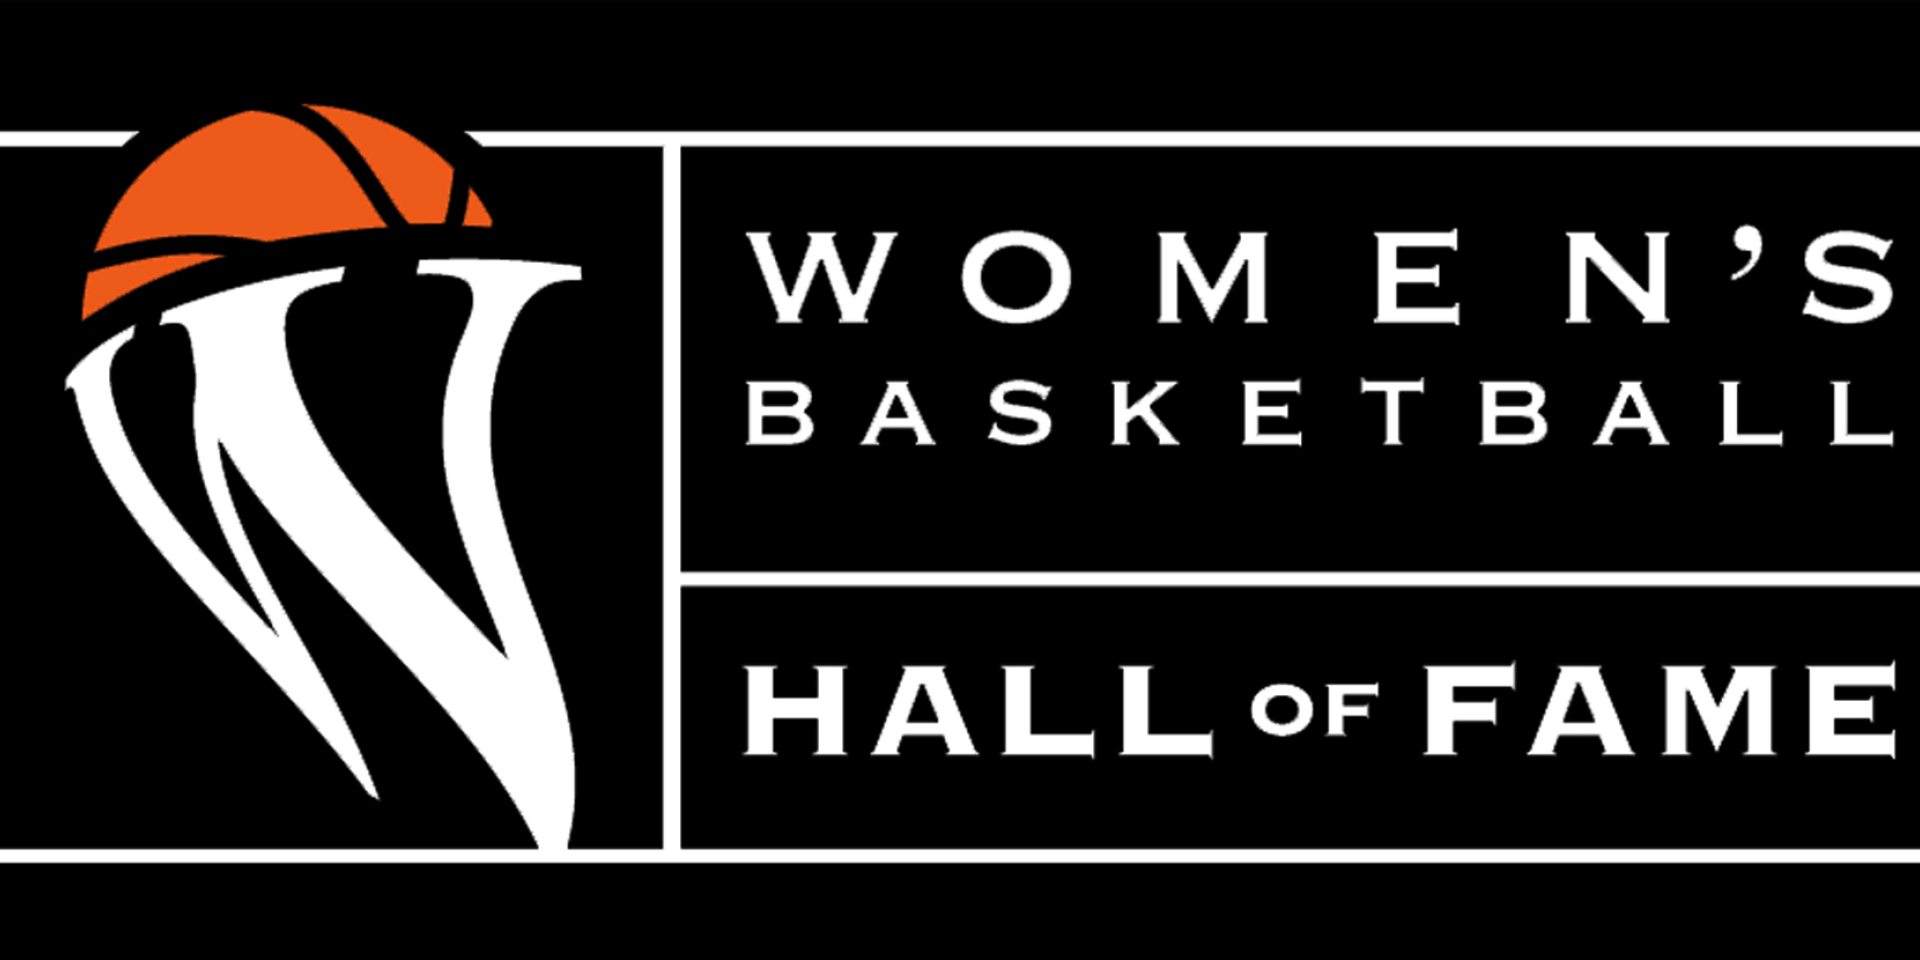 Reynolds jersey chosen for Women's Basketball Hall of Fame "Ring of Honor"